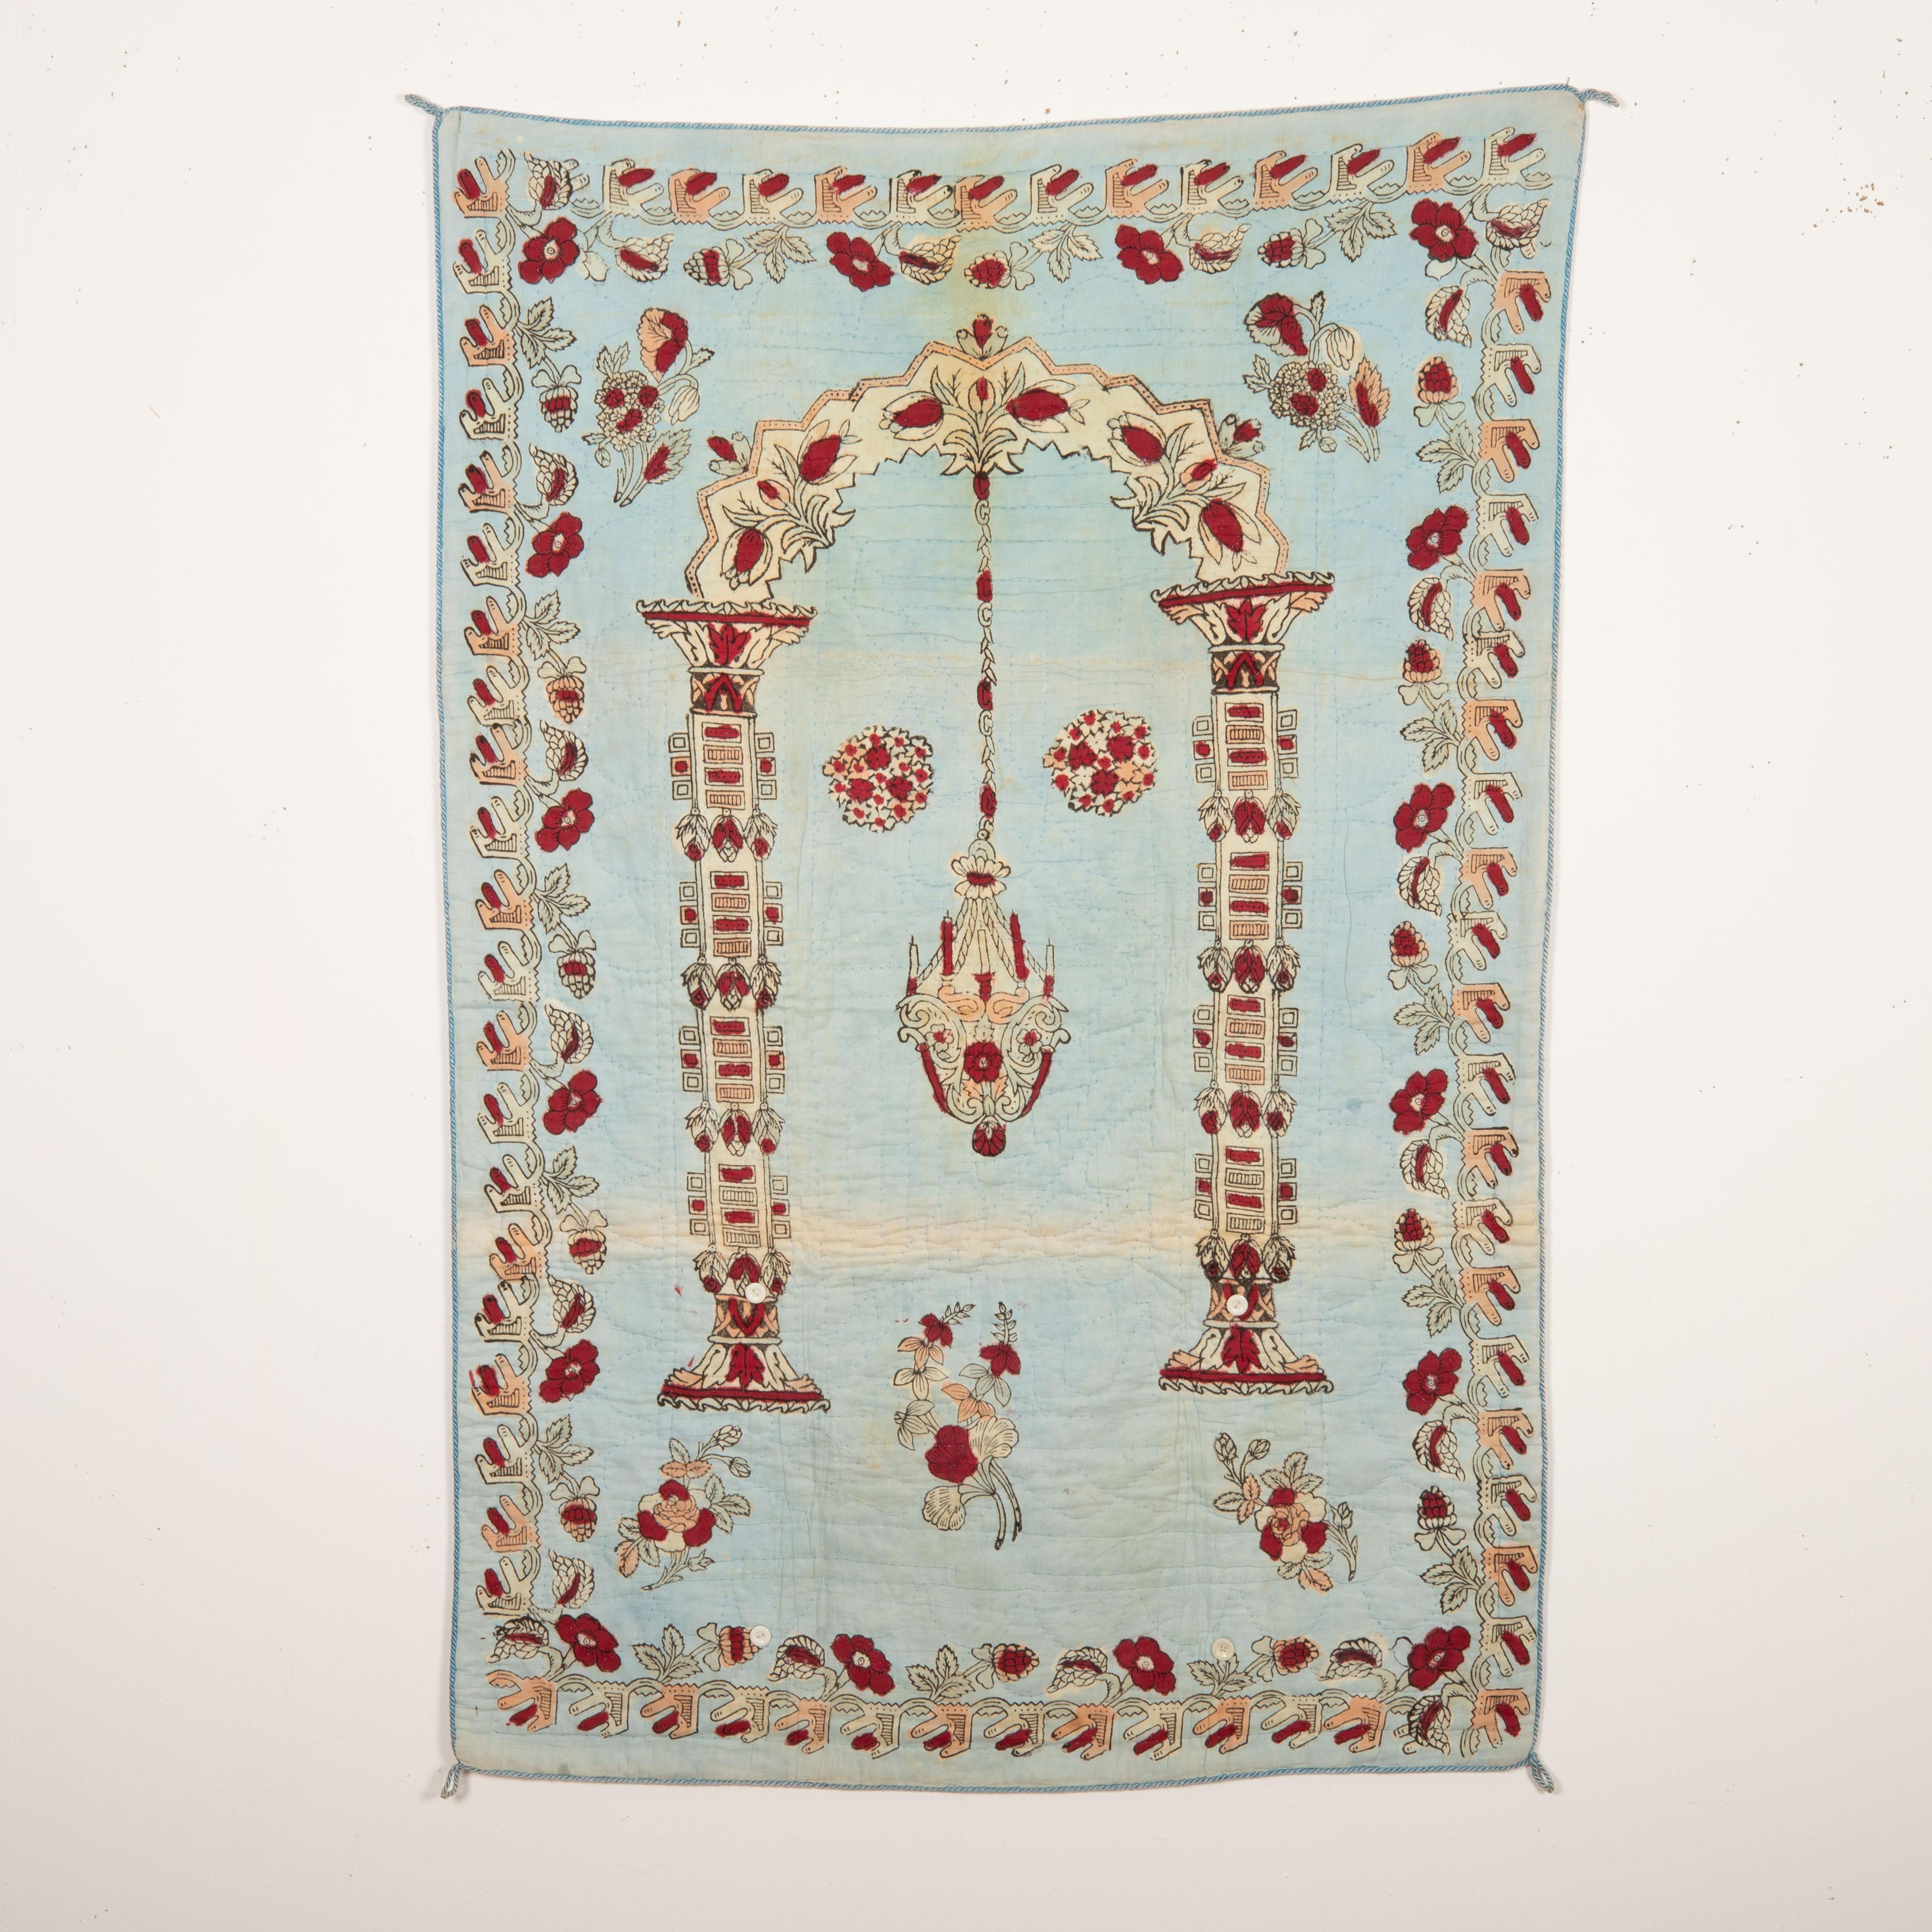 Hand block printing is one of the land marks of Western Anatolian material culture. These quilts have been used either as prayer mats of wall hangings.

